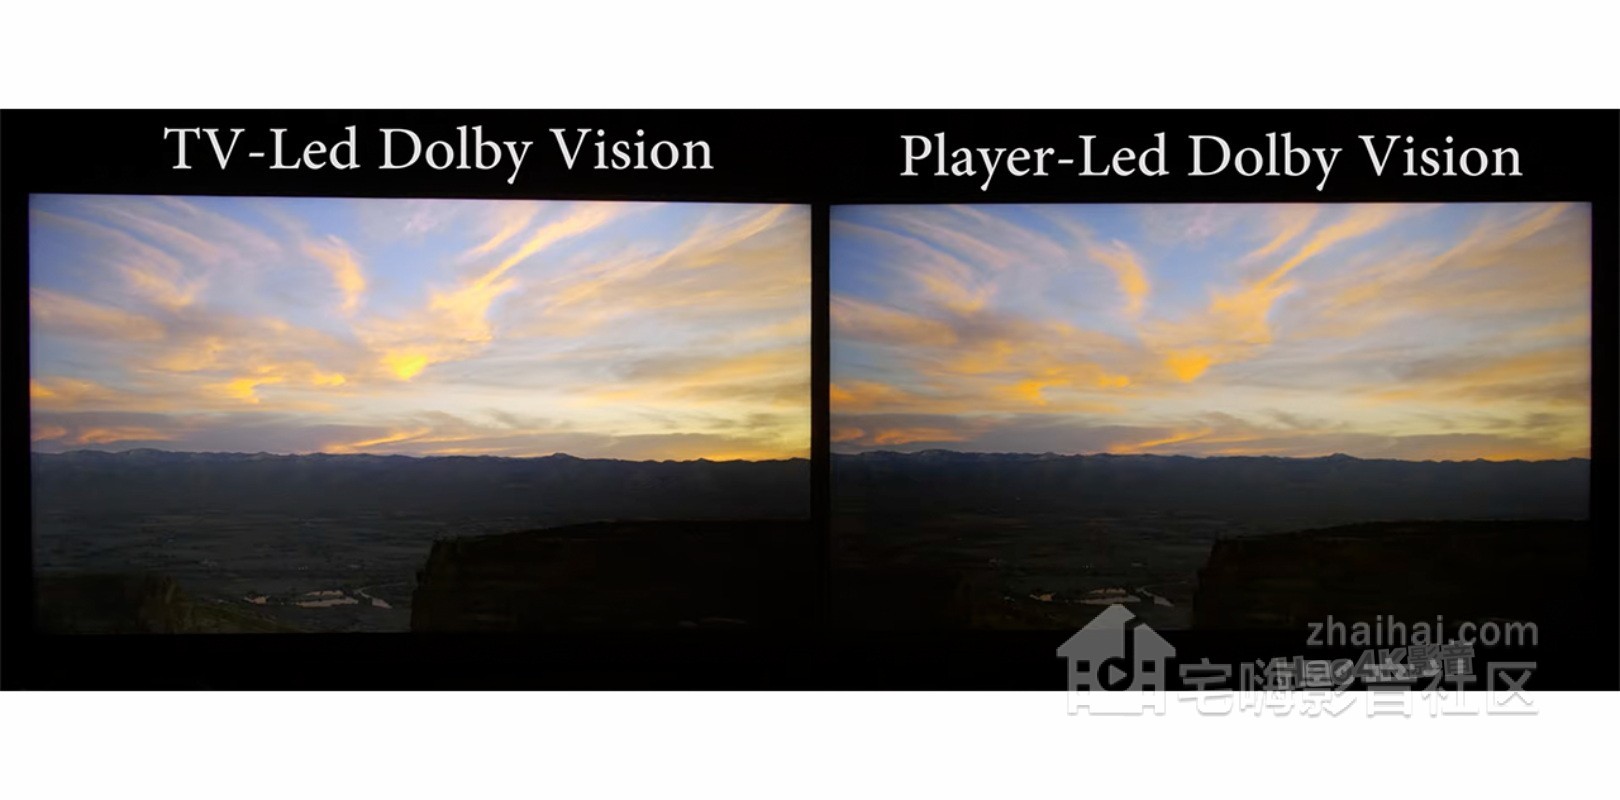 dolby-vision-low-latency-1620x800.jpg